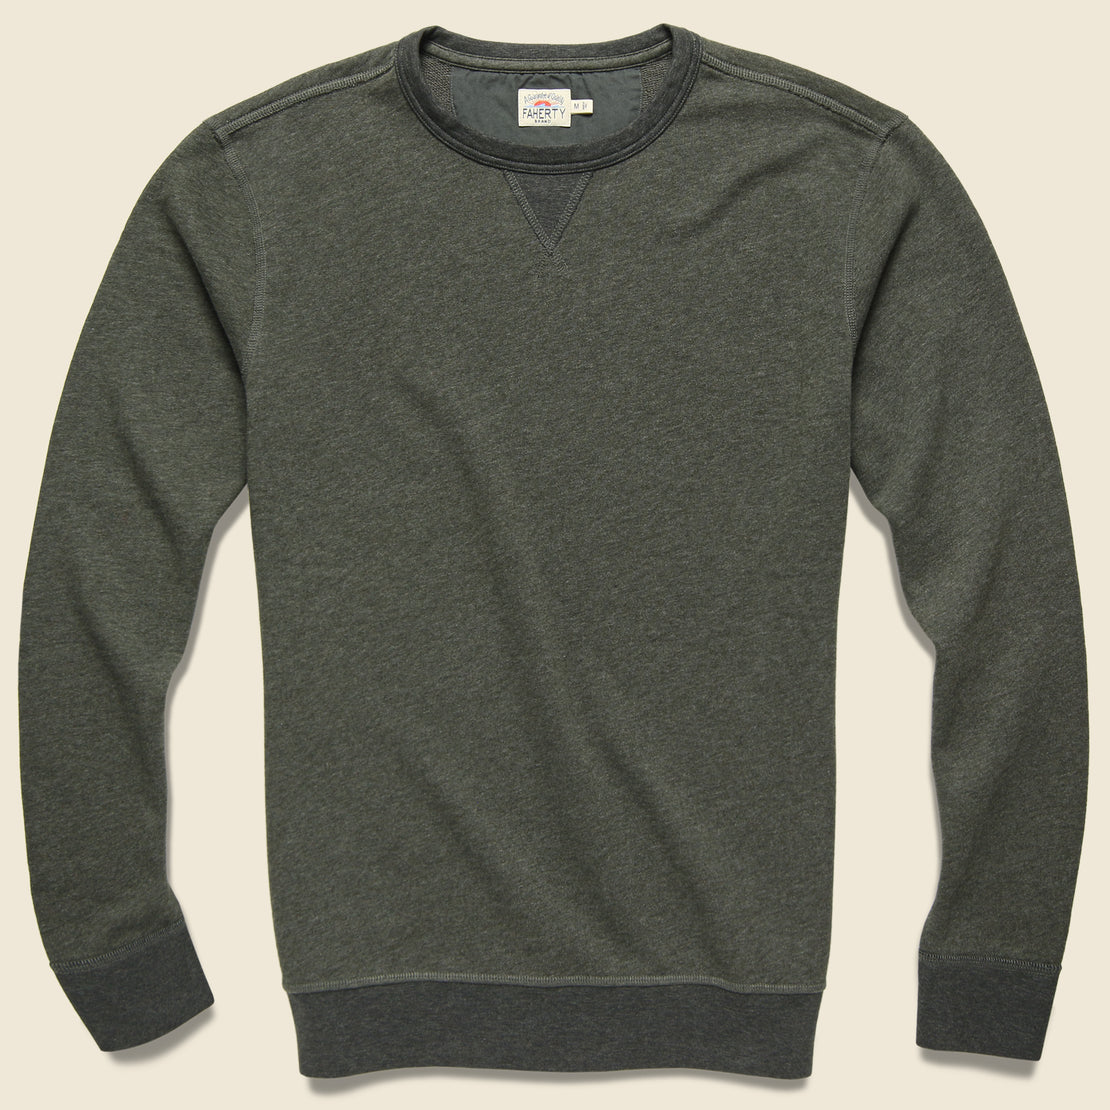 Faherty French Terry Crewneck - Washed Black